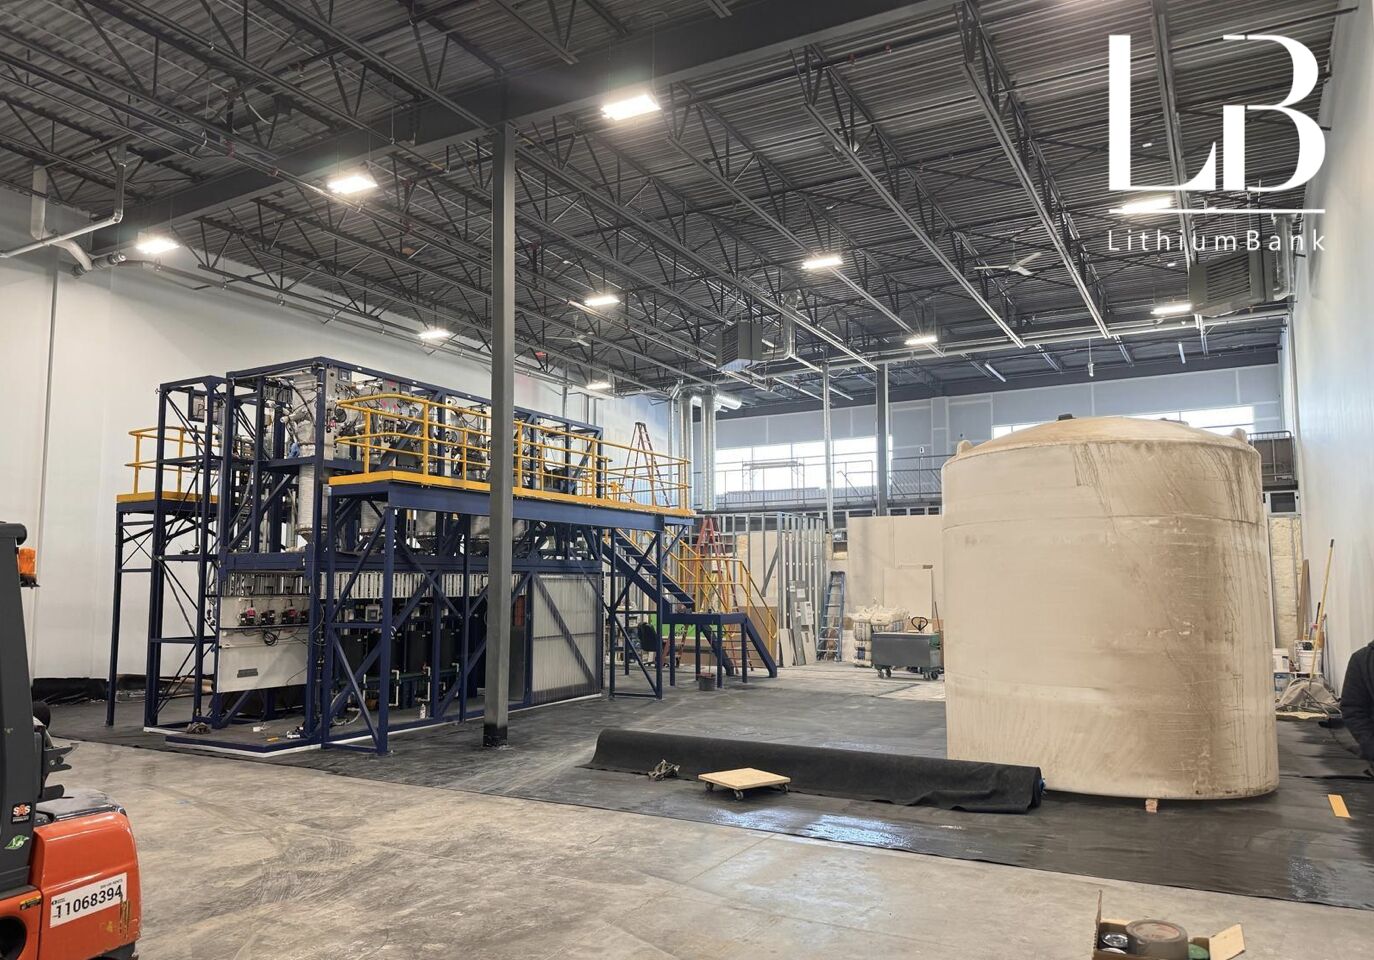 LithiumBank Making Excellent Progress Assembling cDLE® Pilot Plant in Calgary